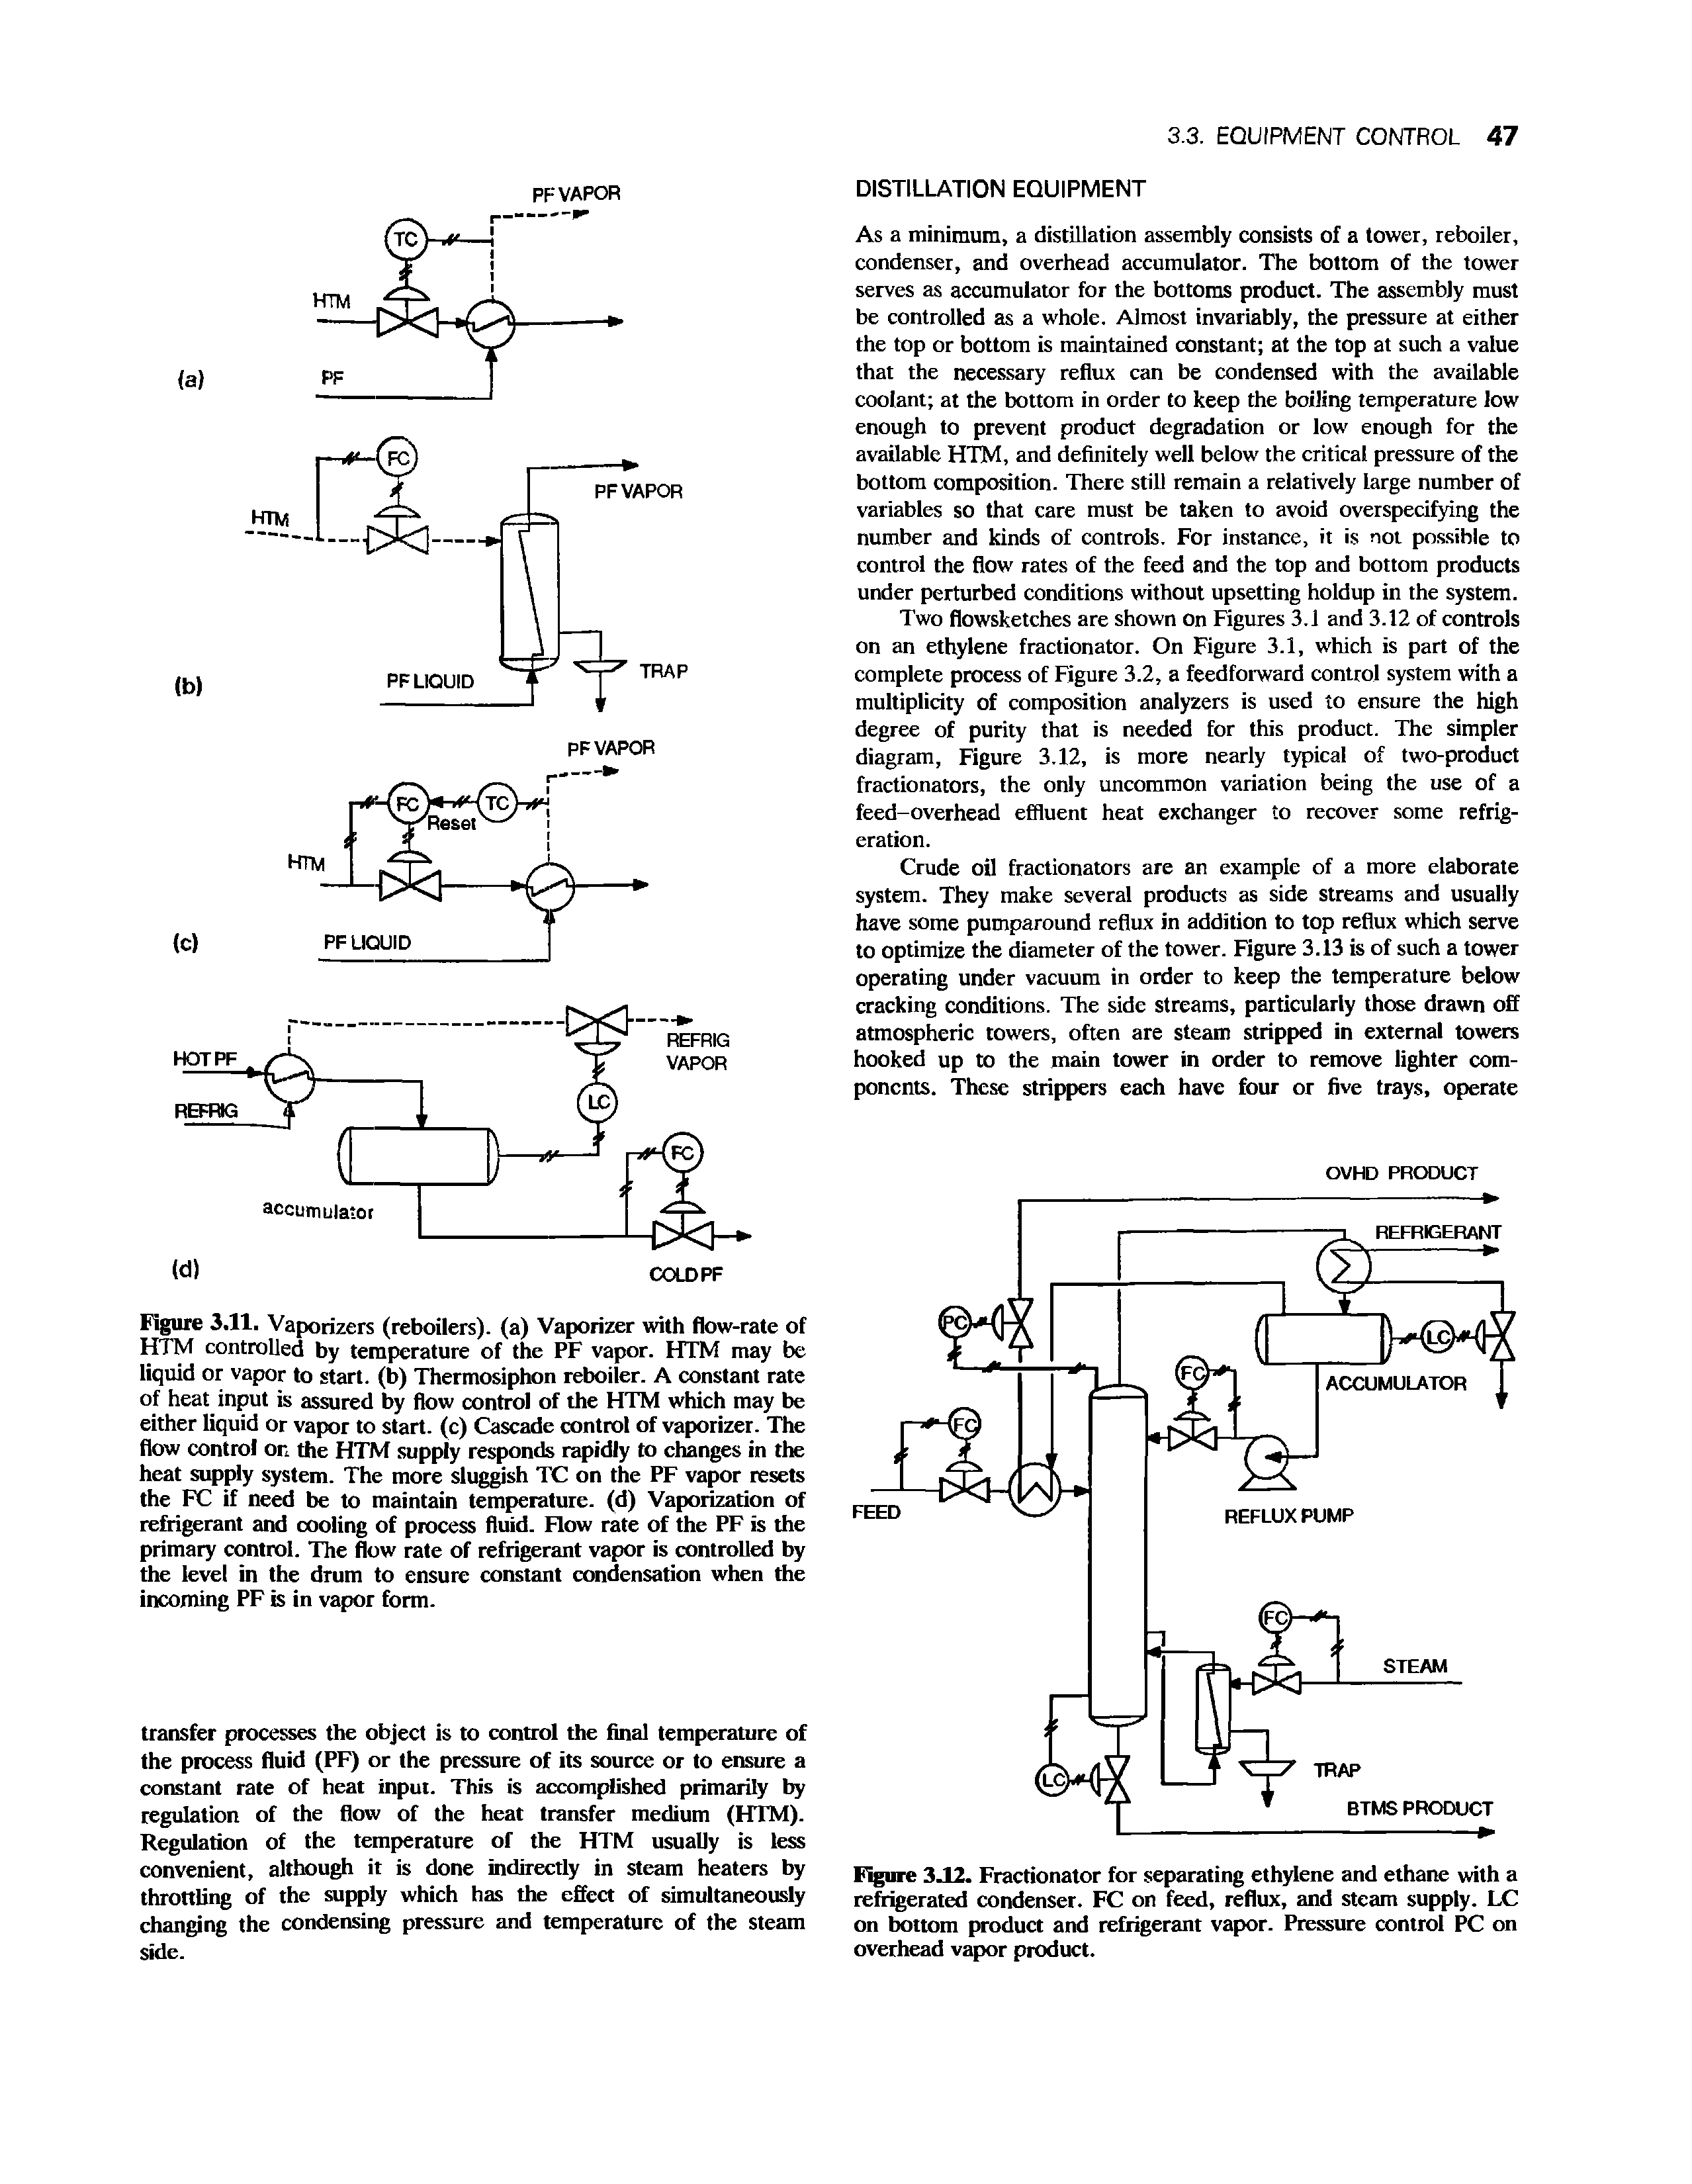 Figure 3.12. Fractionator for separating ethylene and ethane with a refrigerated condenser. FC on feed, reflux, and steam supply. LC on bottom product and refrigerant vapor. Pressure control PC on overhead vapor product.